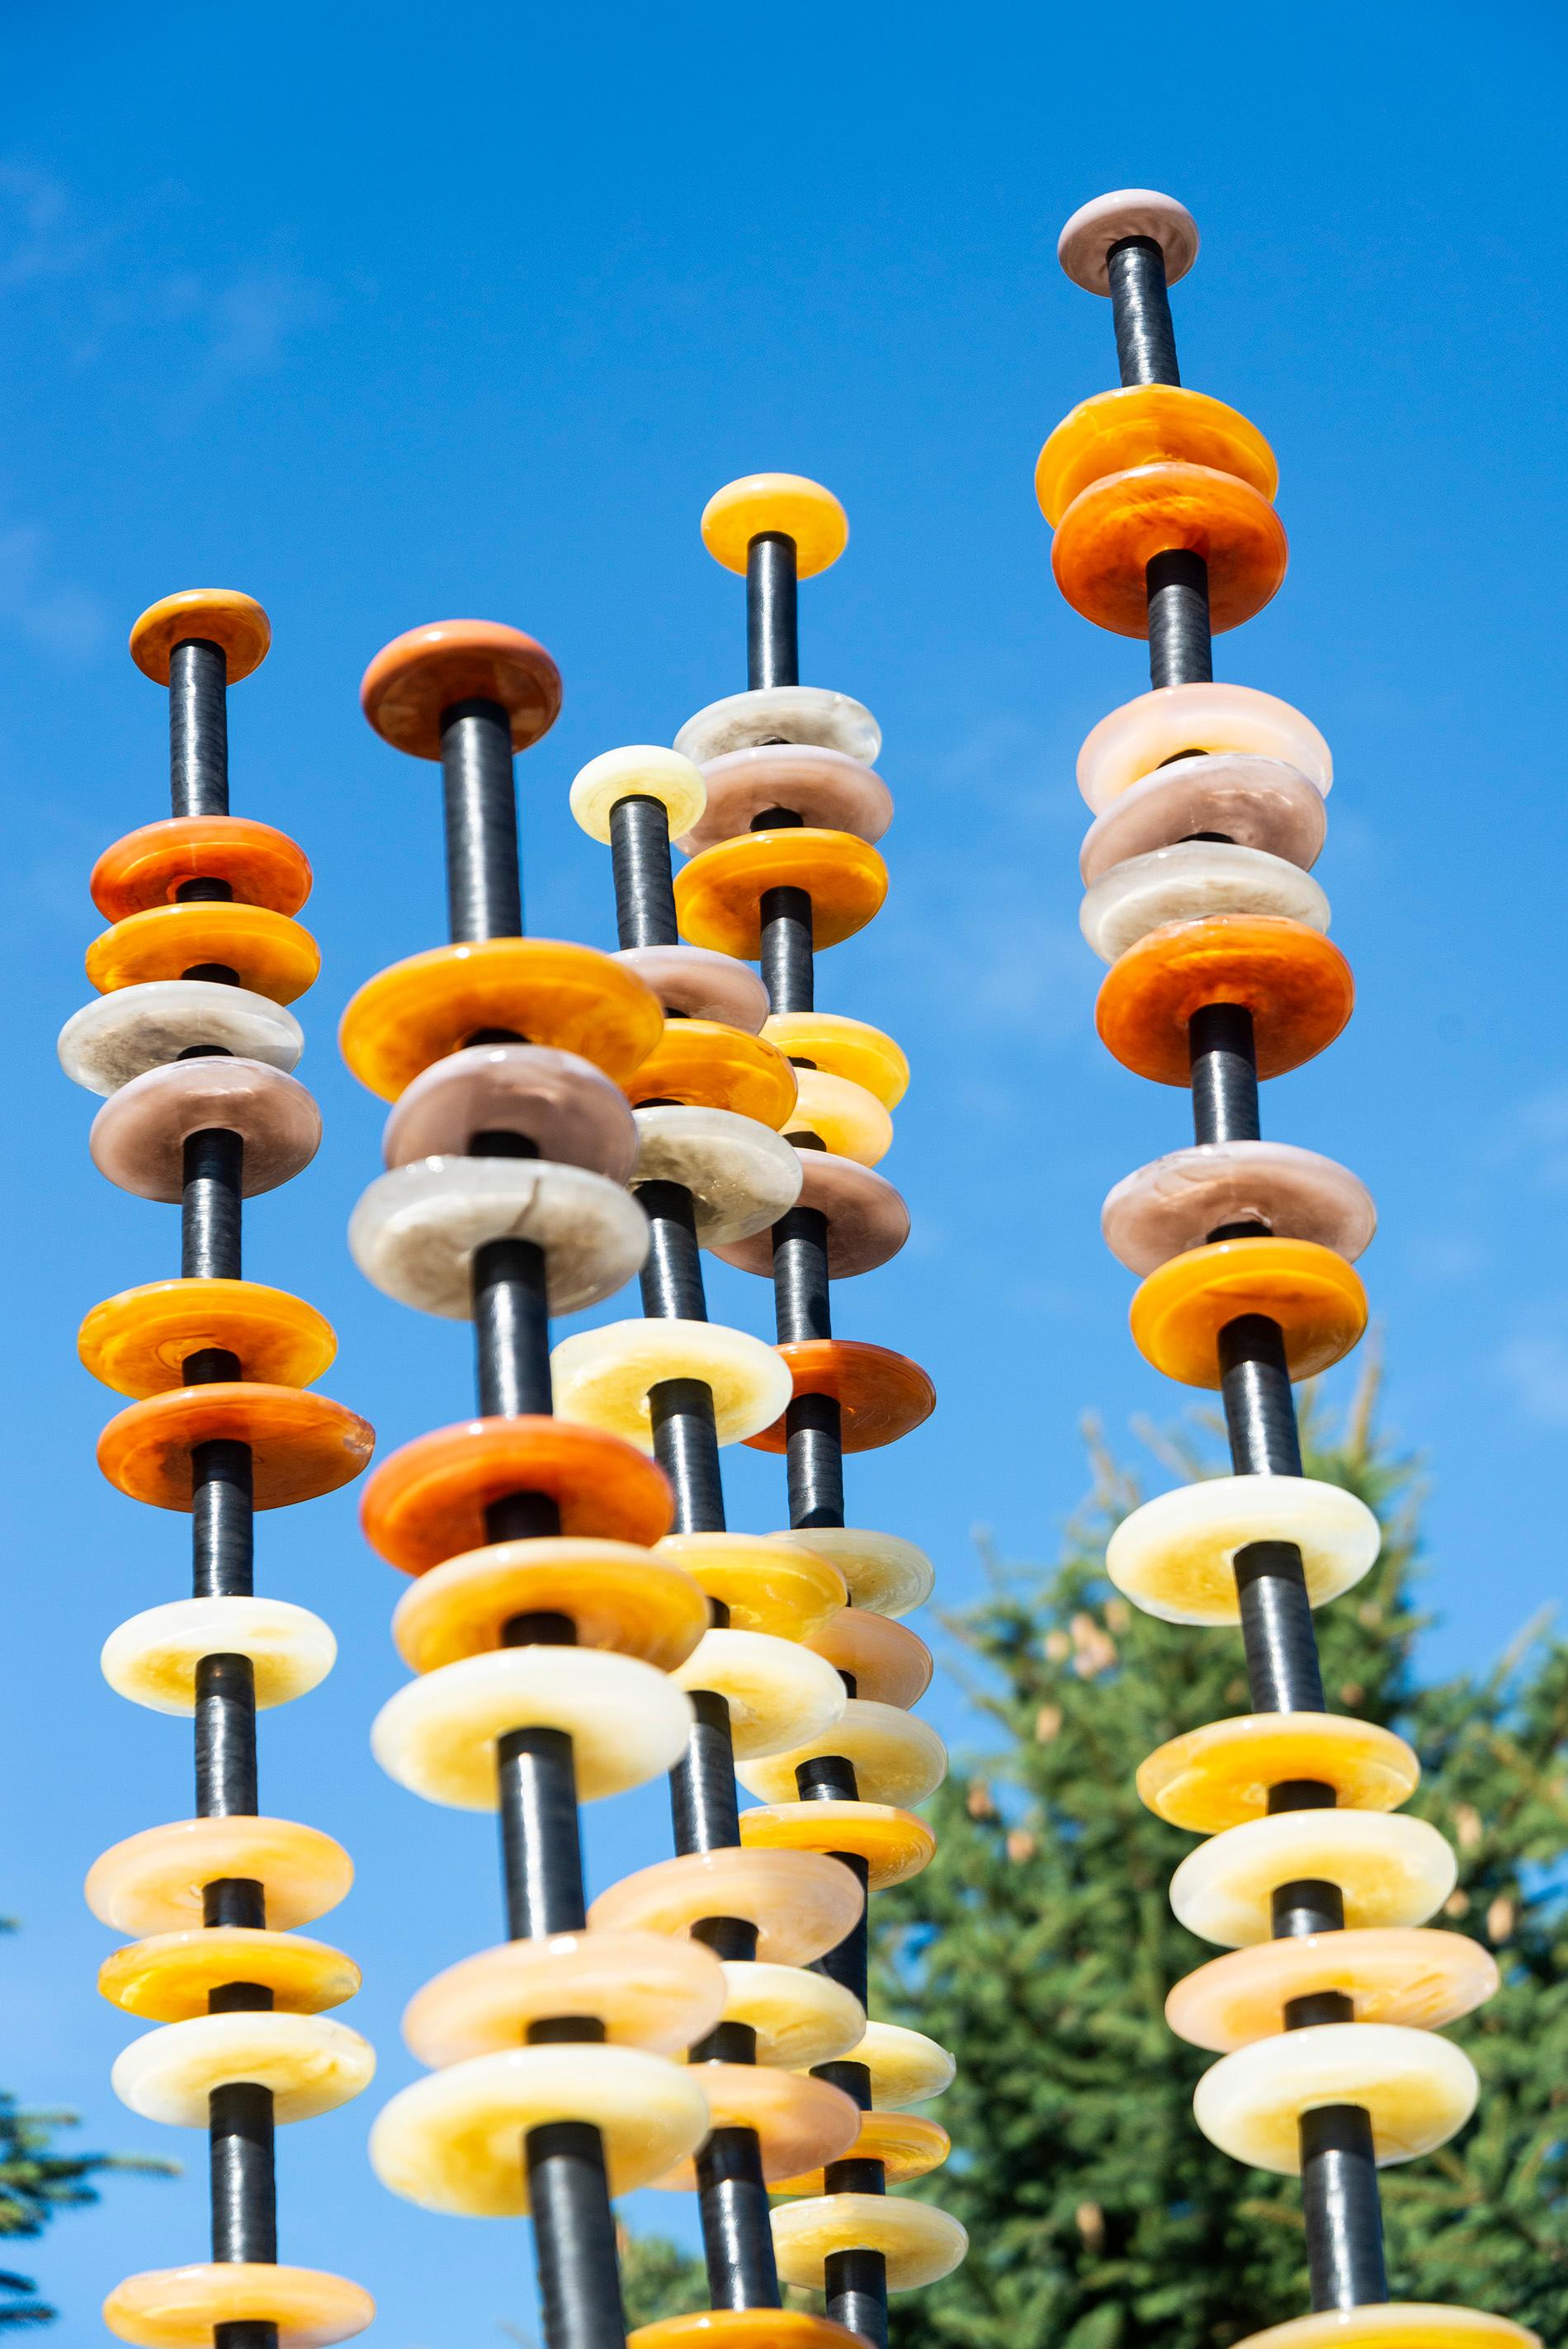 Like flowers in a garden, Susan Rankin’s beautiful glass columns appear to sway in the breeze. An avid gardener, Rankin has created a series of outdoor sculptures inspired by the forms and colours found in nature. These five steel columns feature